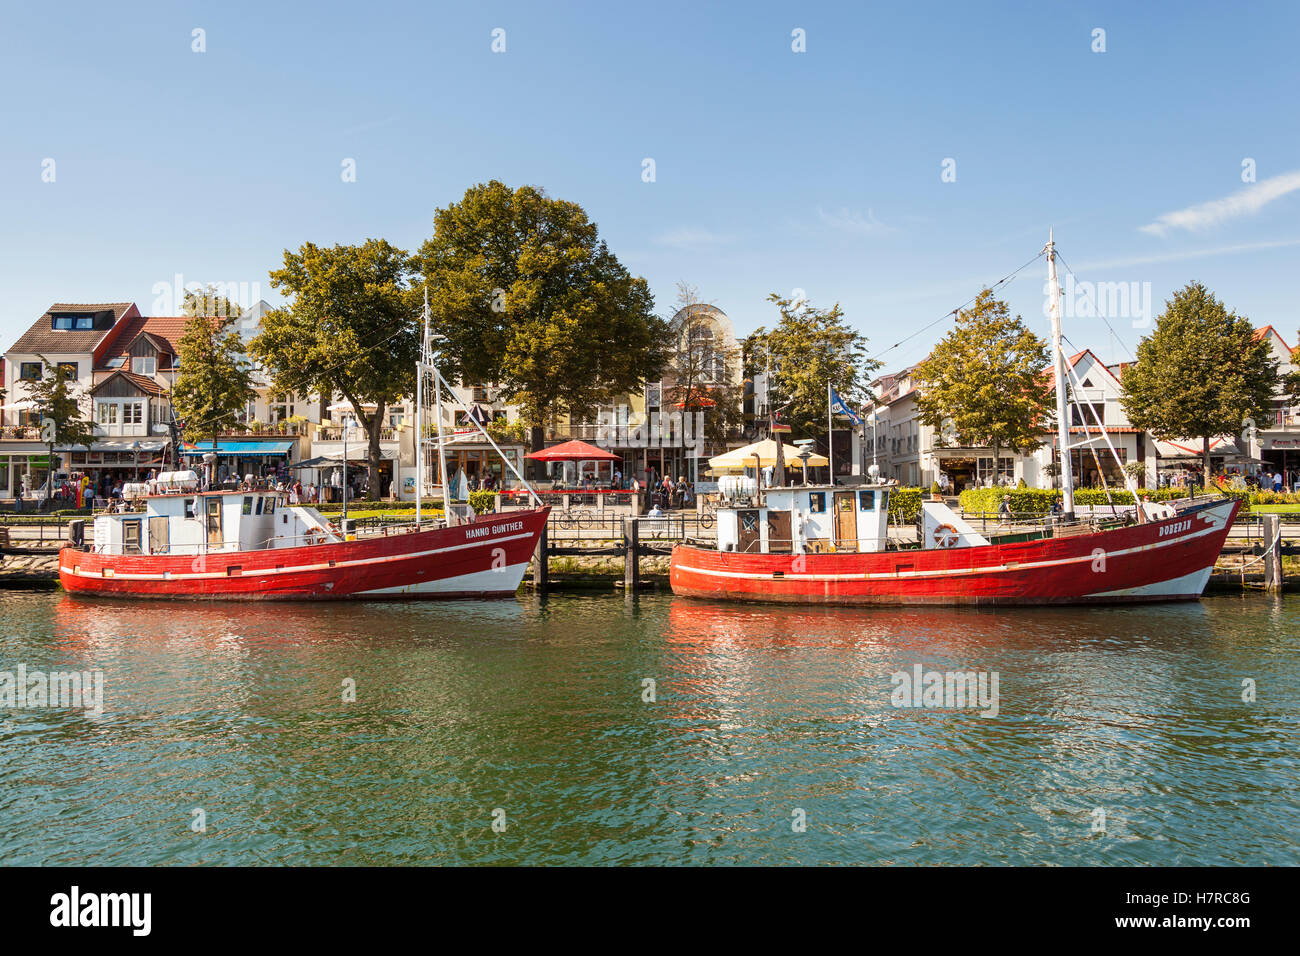 Fishing boats, Doberan and Hanno Gunther, Alter Strom Canal, and Am Strom Street, Warnemunde, Germany Stock Photo